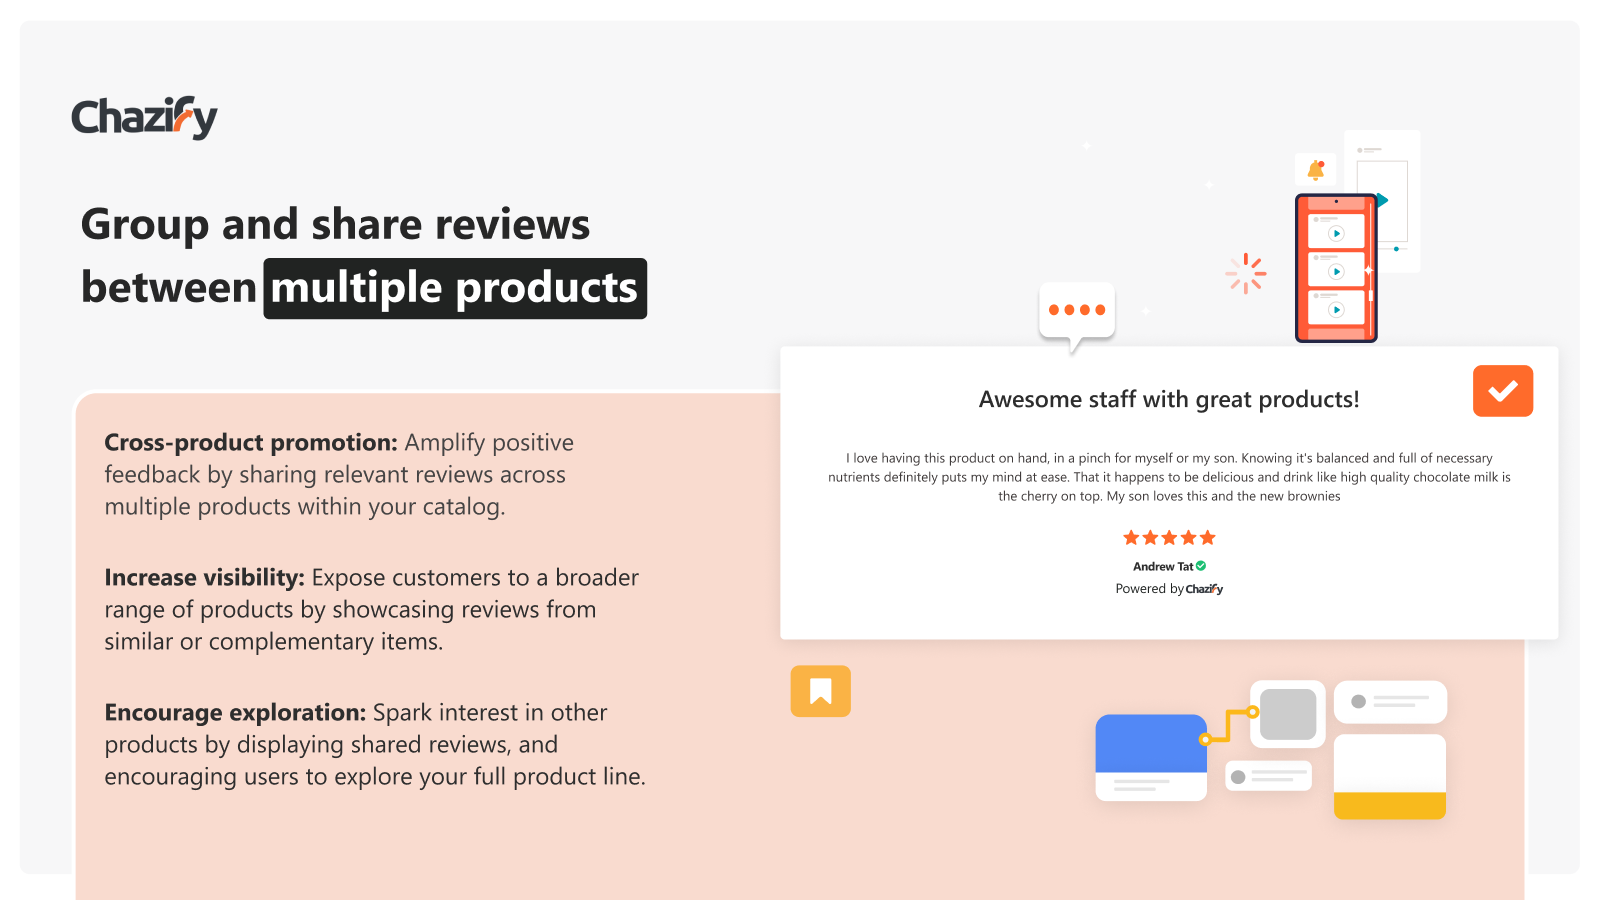 Group and share reviews between multiple products